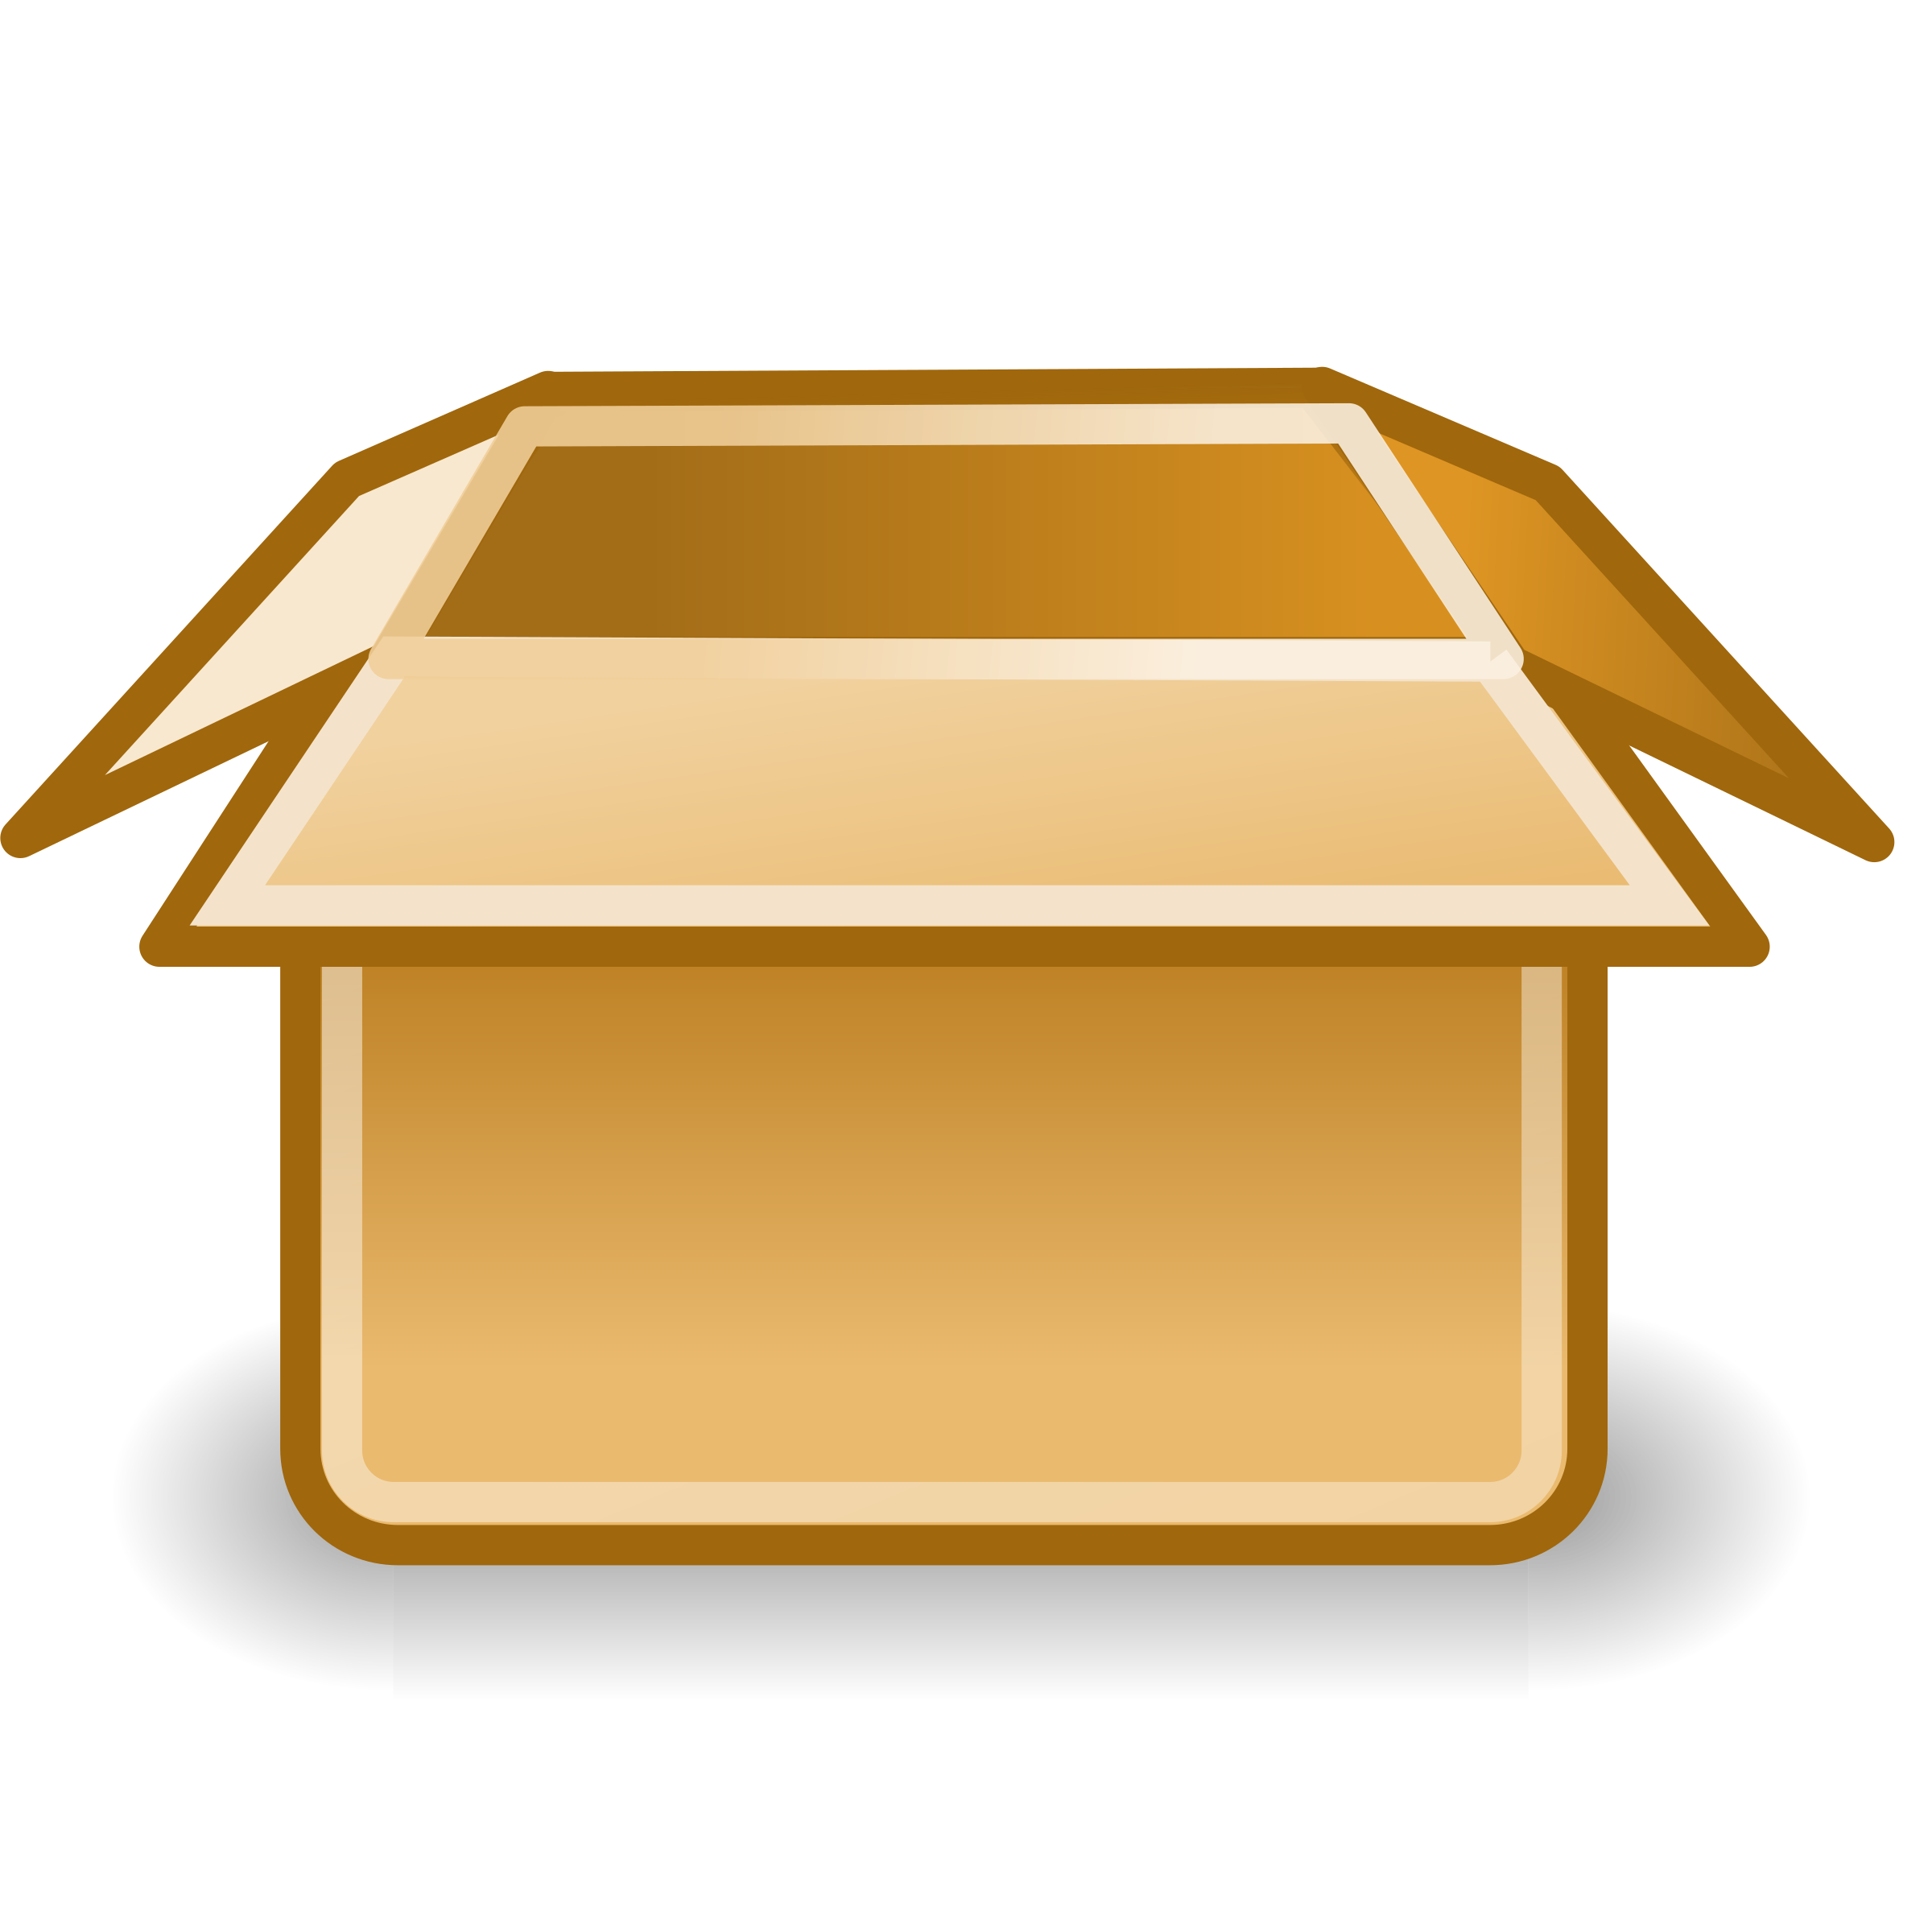 Cardboard box png clipart